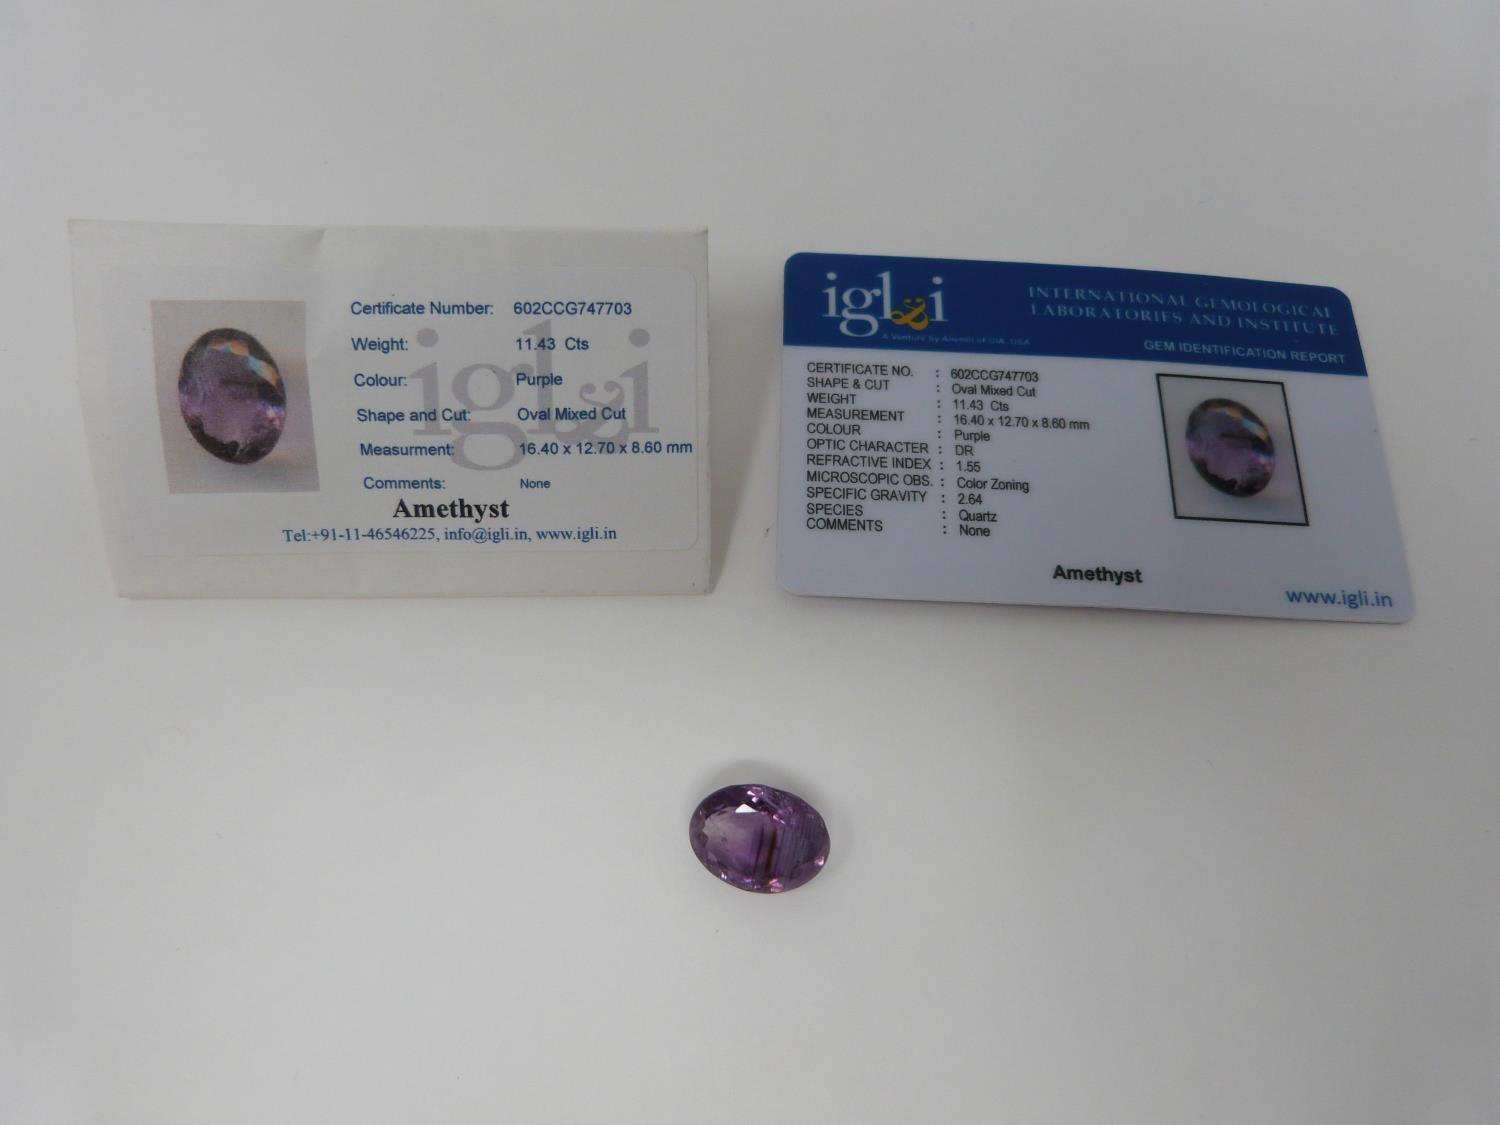 An IGL & I (International Gemological Laboratories and Institute) certificated oval mixed cut - Image 8 of 14